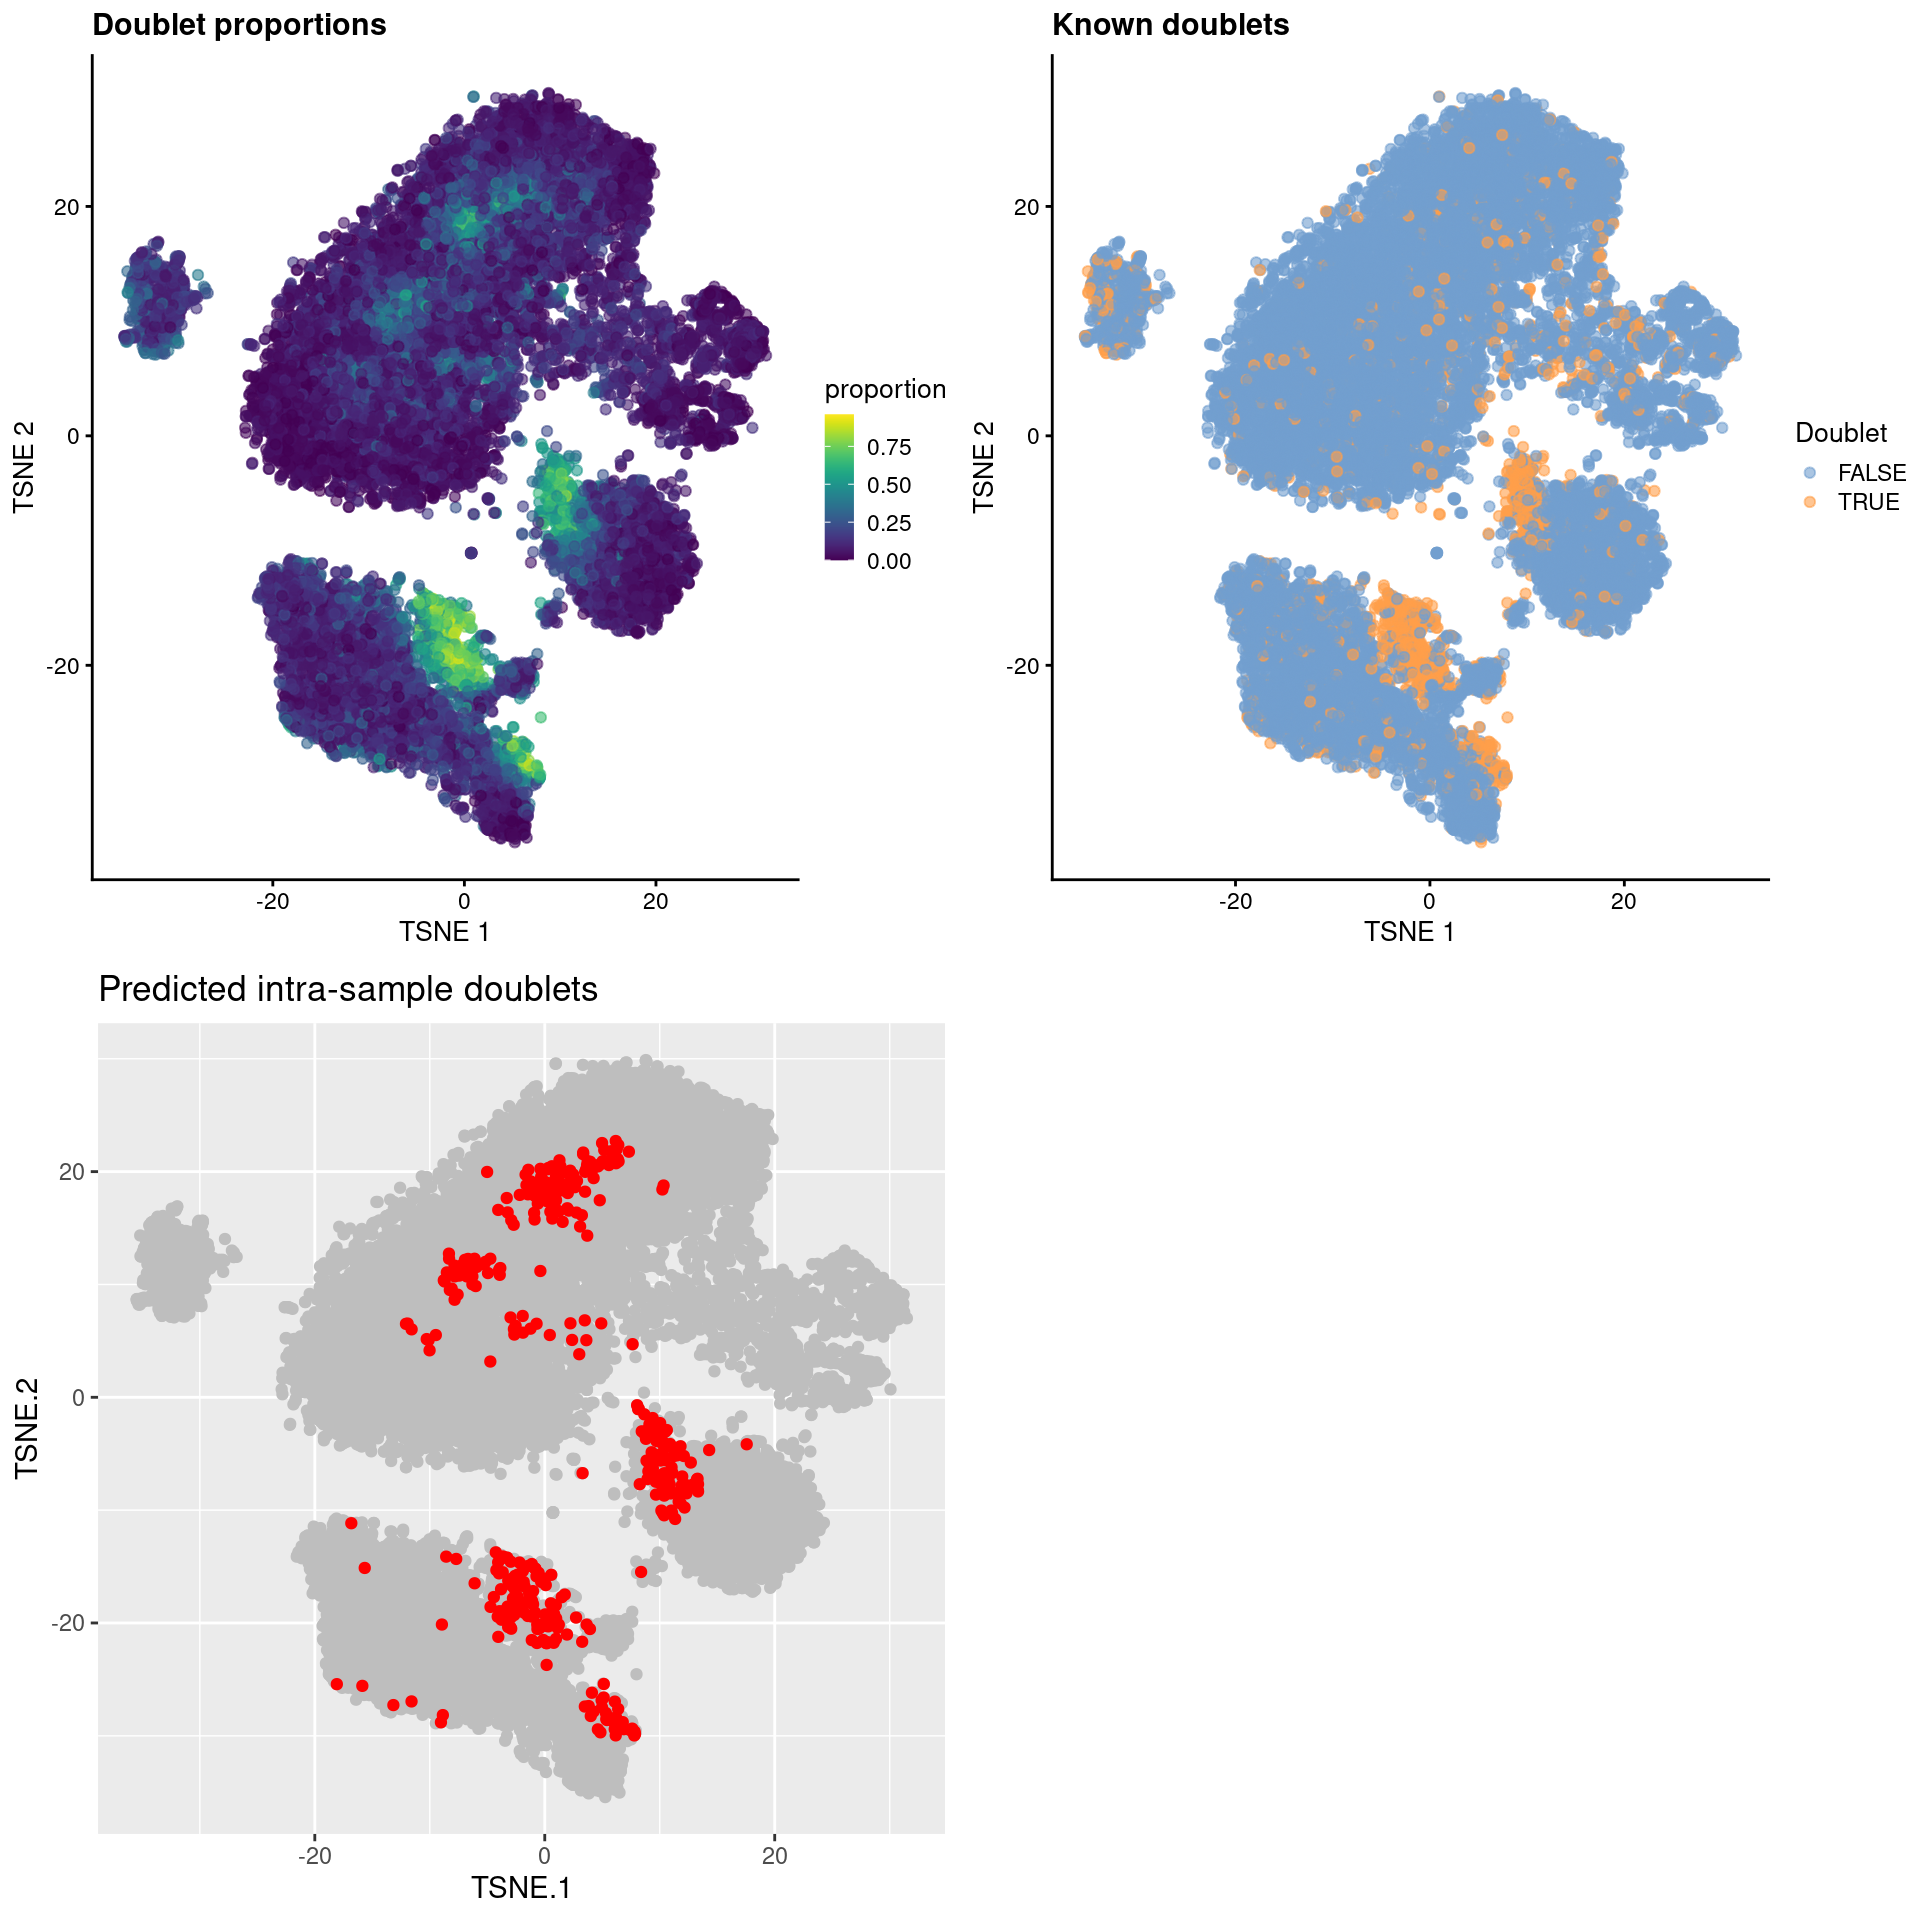 $t$-SNE plots for gene expression data from the cell hashing study, where each point is a cell and is colored by the doublet proportion (top left), whether or not it is a known inter-sample doublet (top right) and whether it is a predicted intra-sample doublet (bottom left).